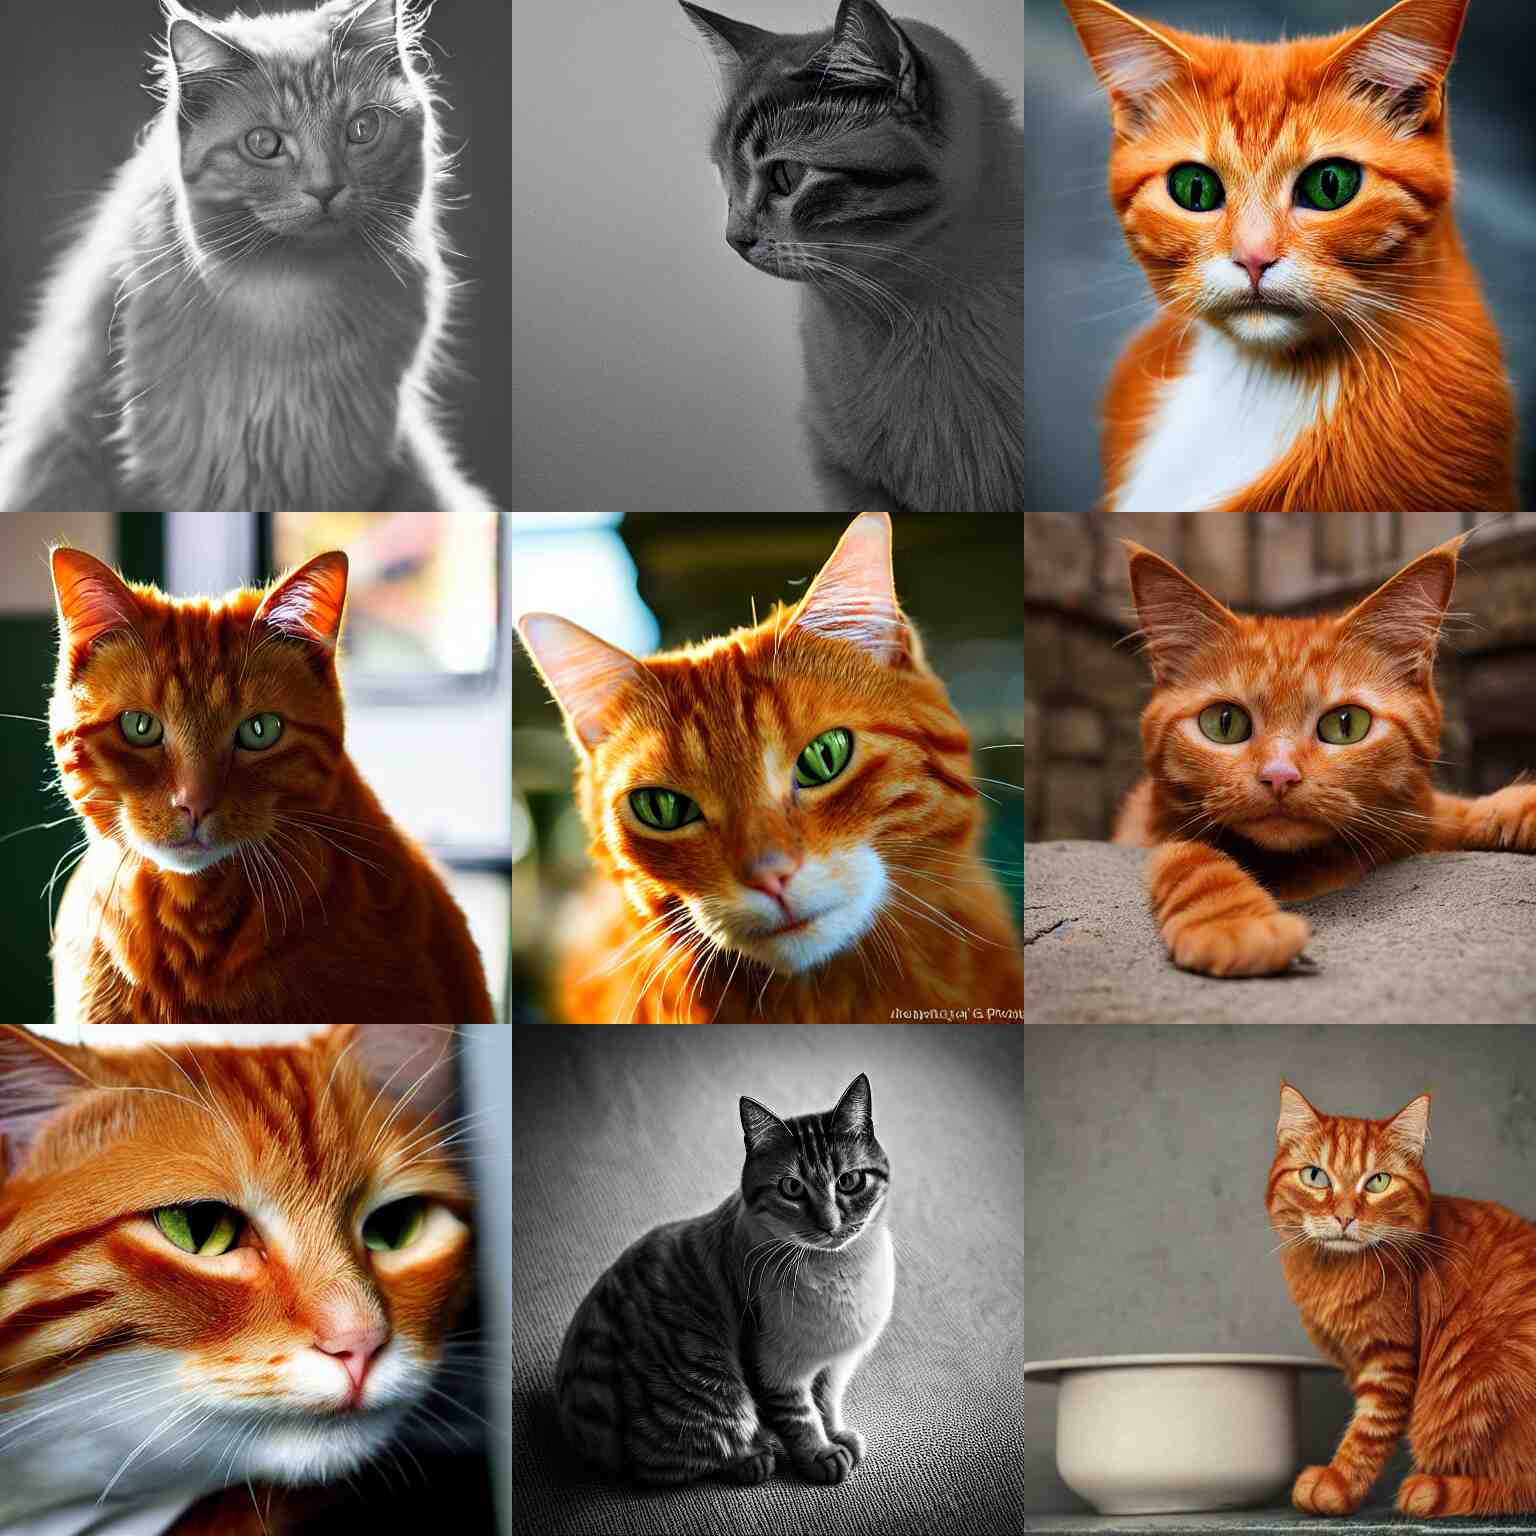 Is It Possible To Detect Different Cat Breed In Images With An API?